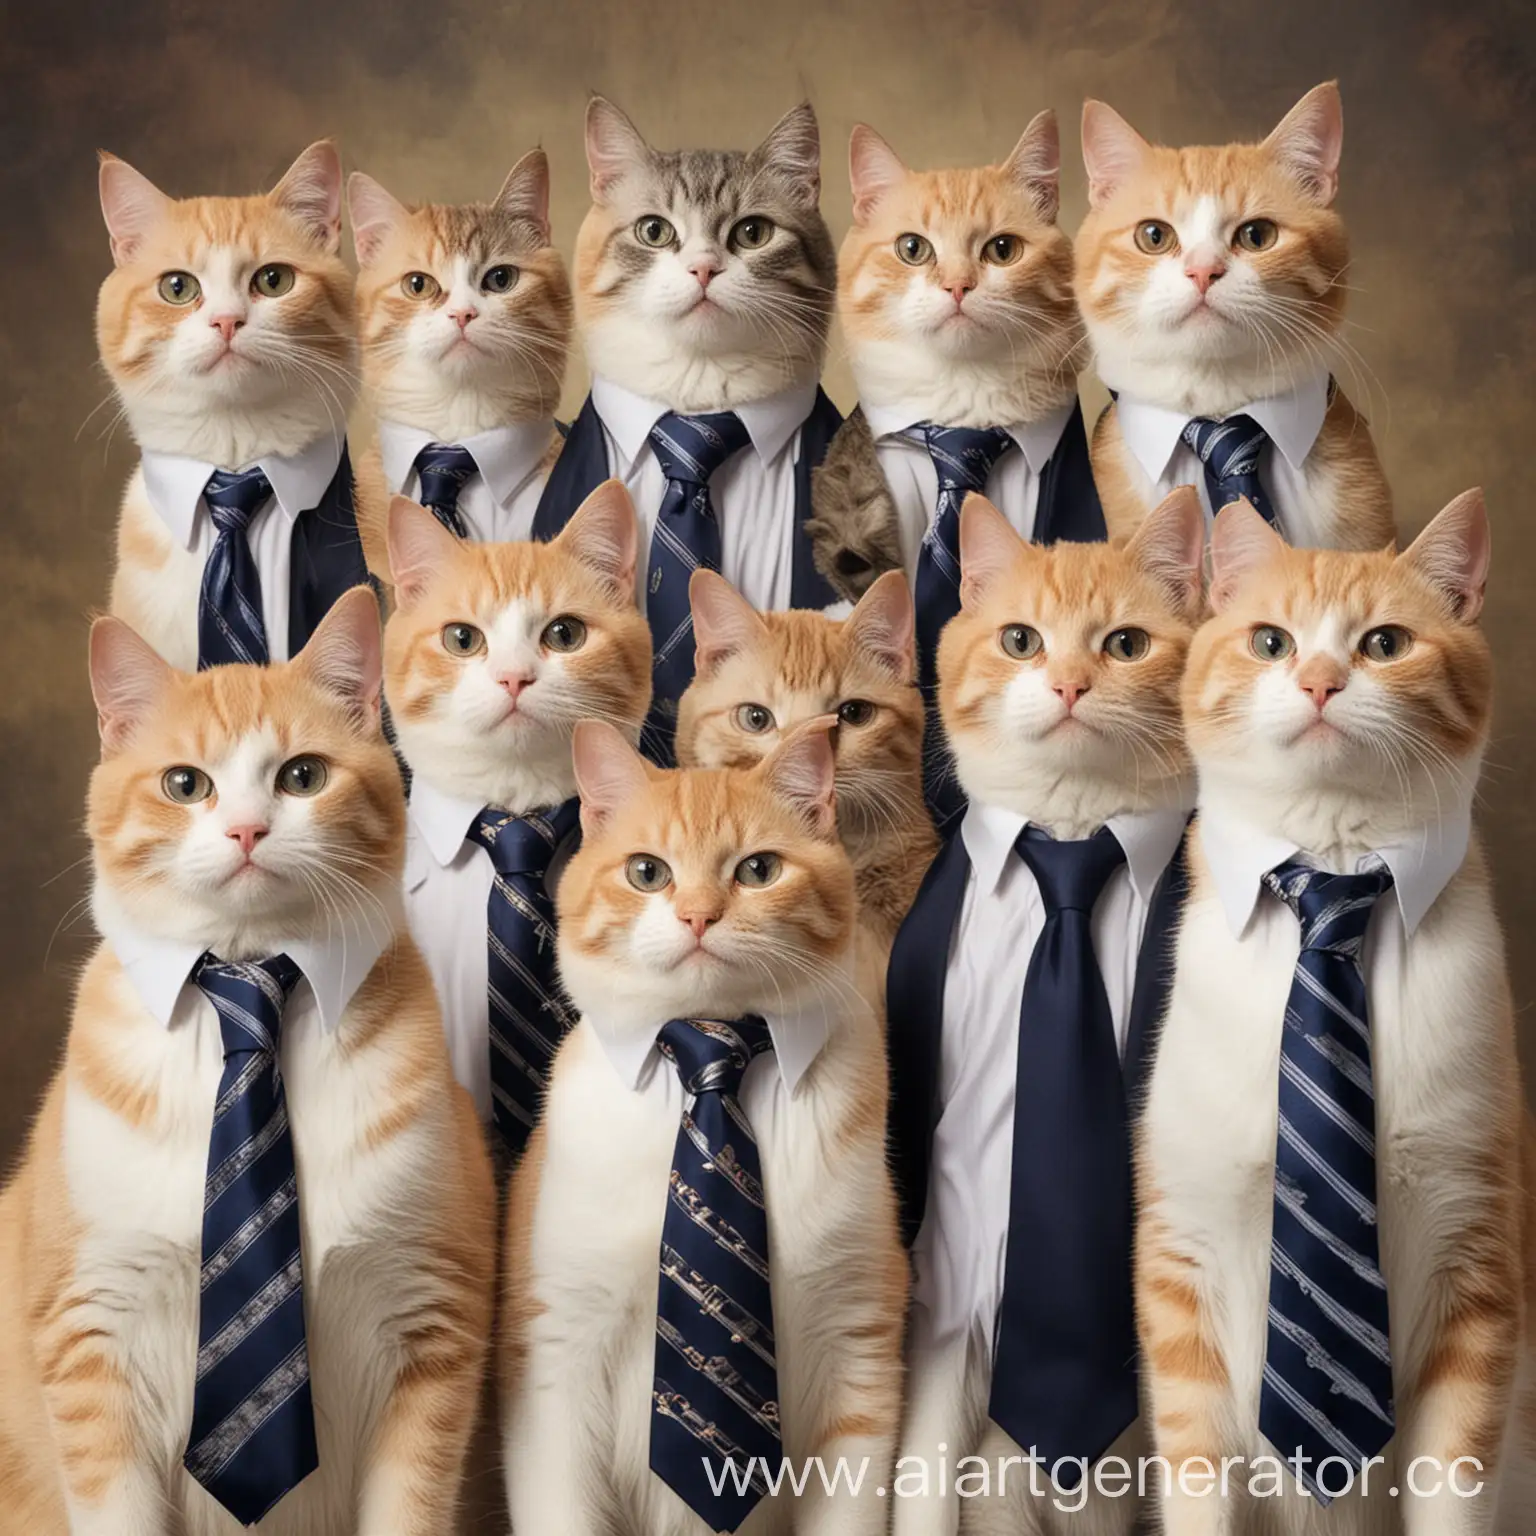 Create a meme picture with 10 cats in ties